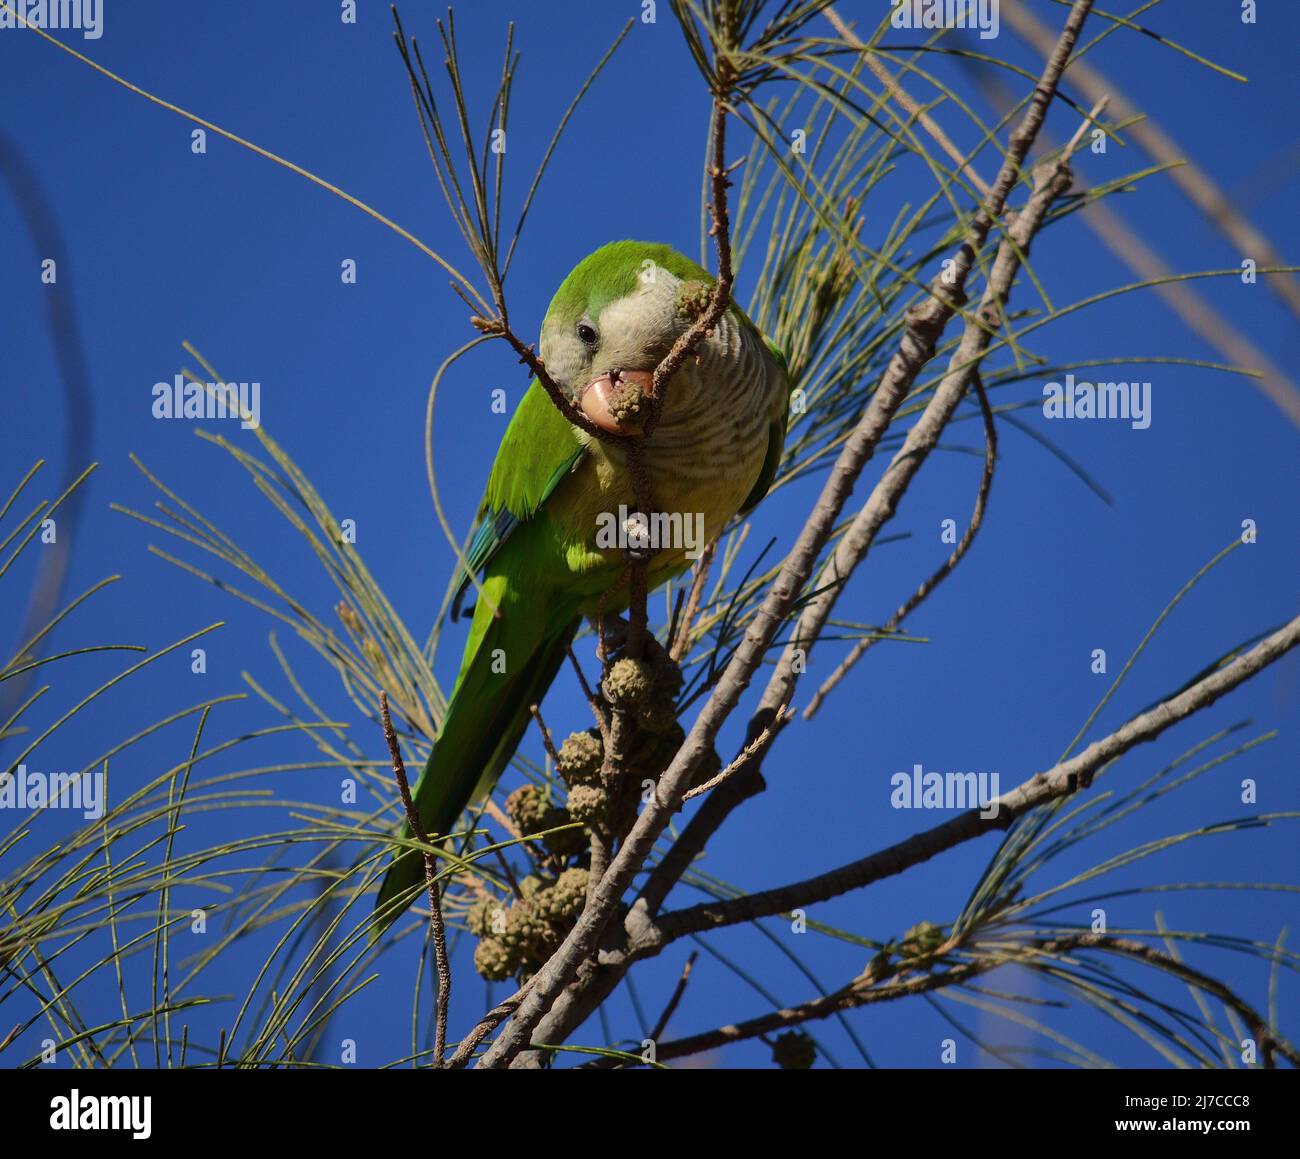 Parakeet among the branches of the Casuarina tree eating the small fruits Stock Photo